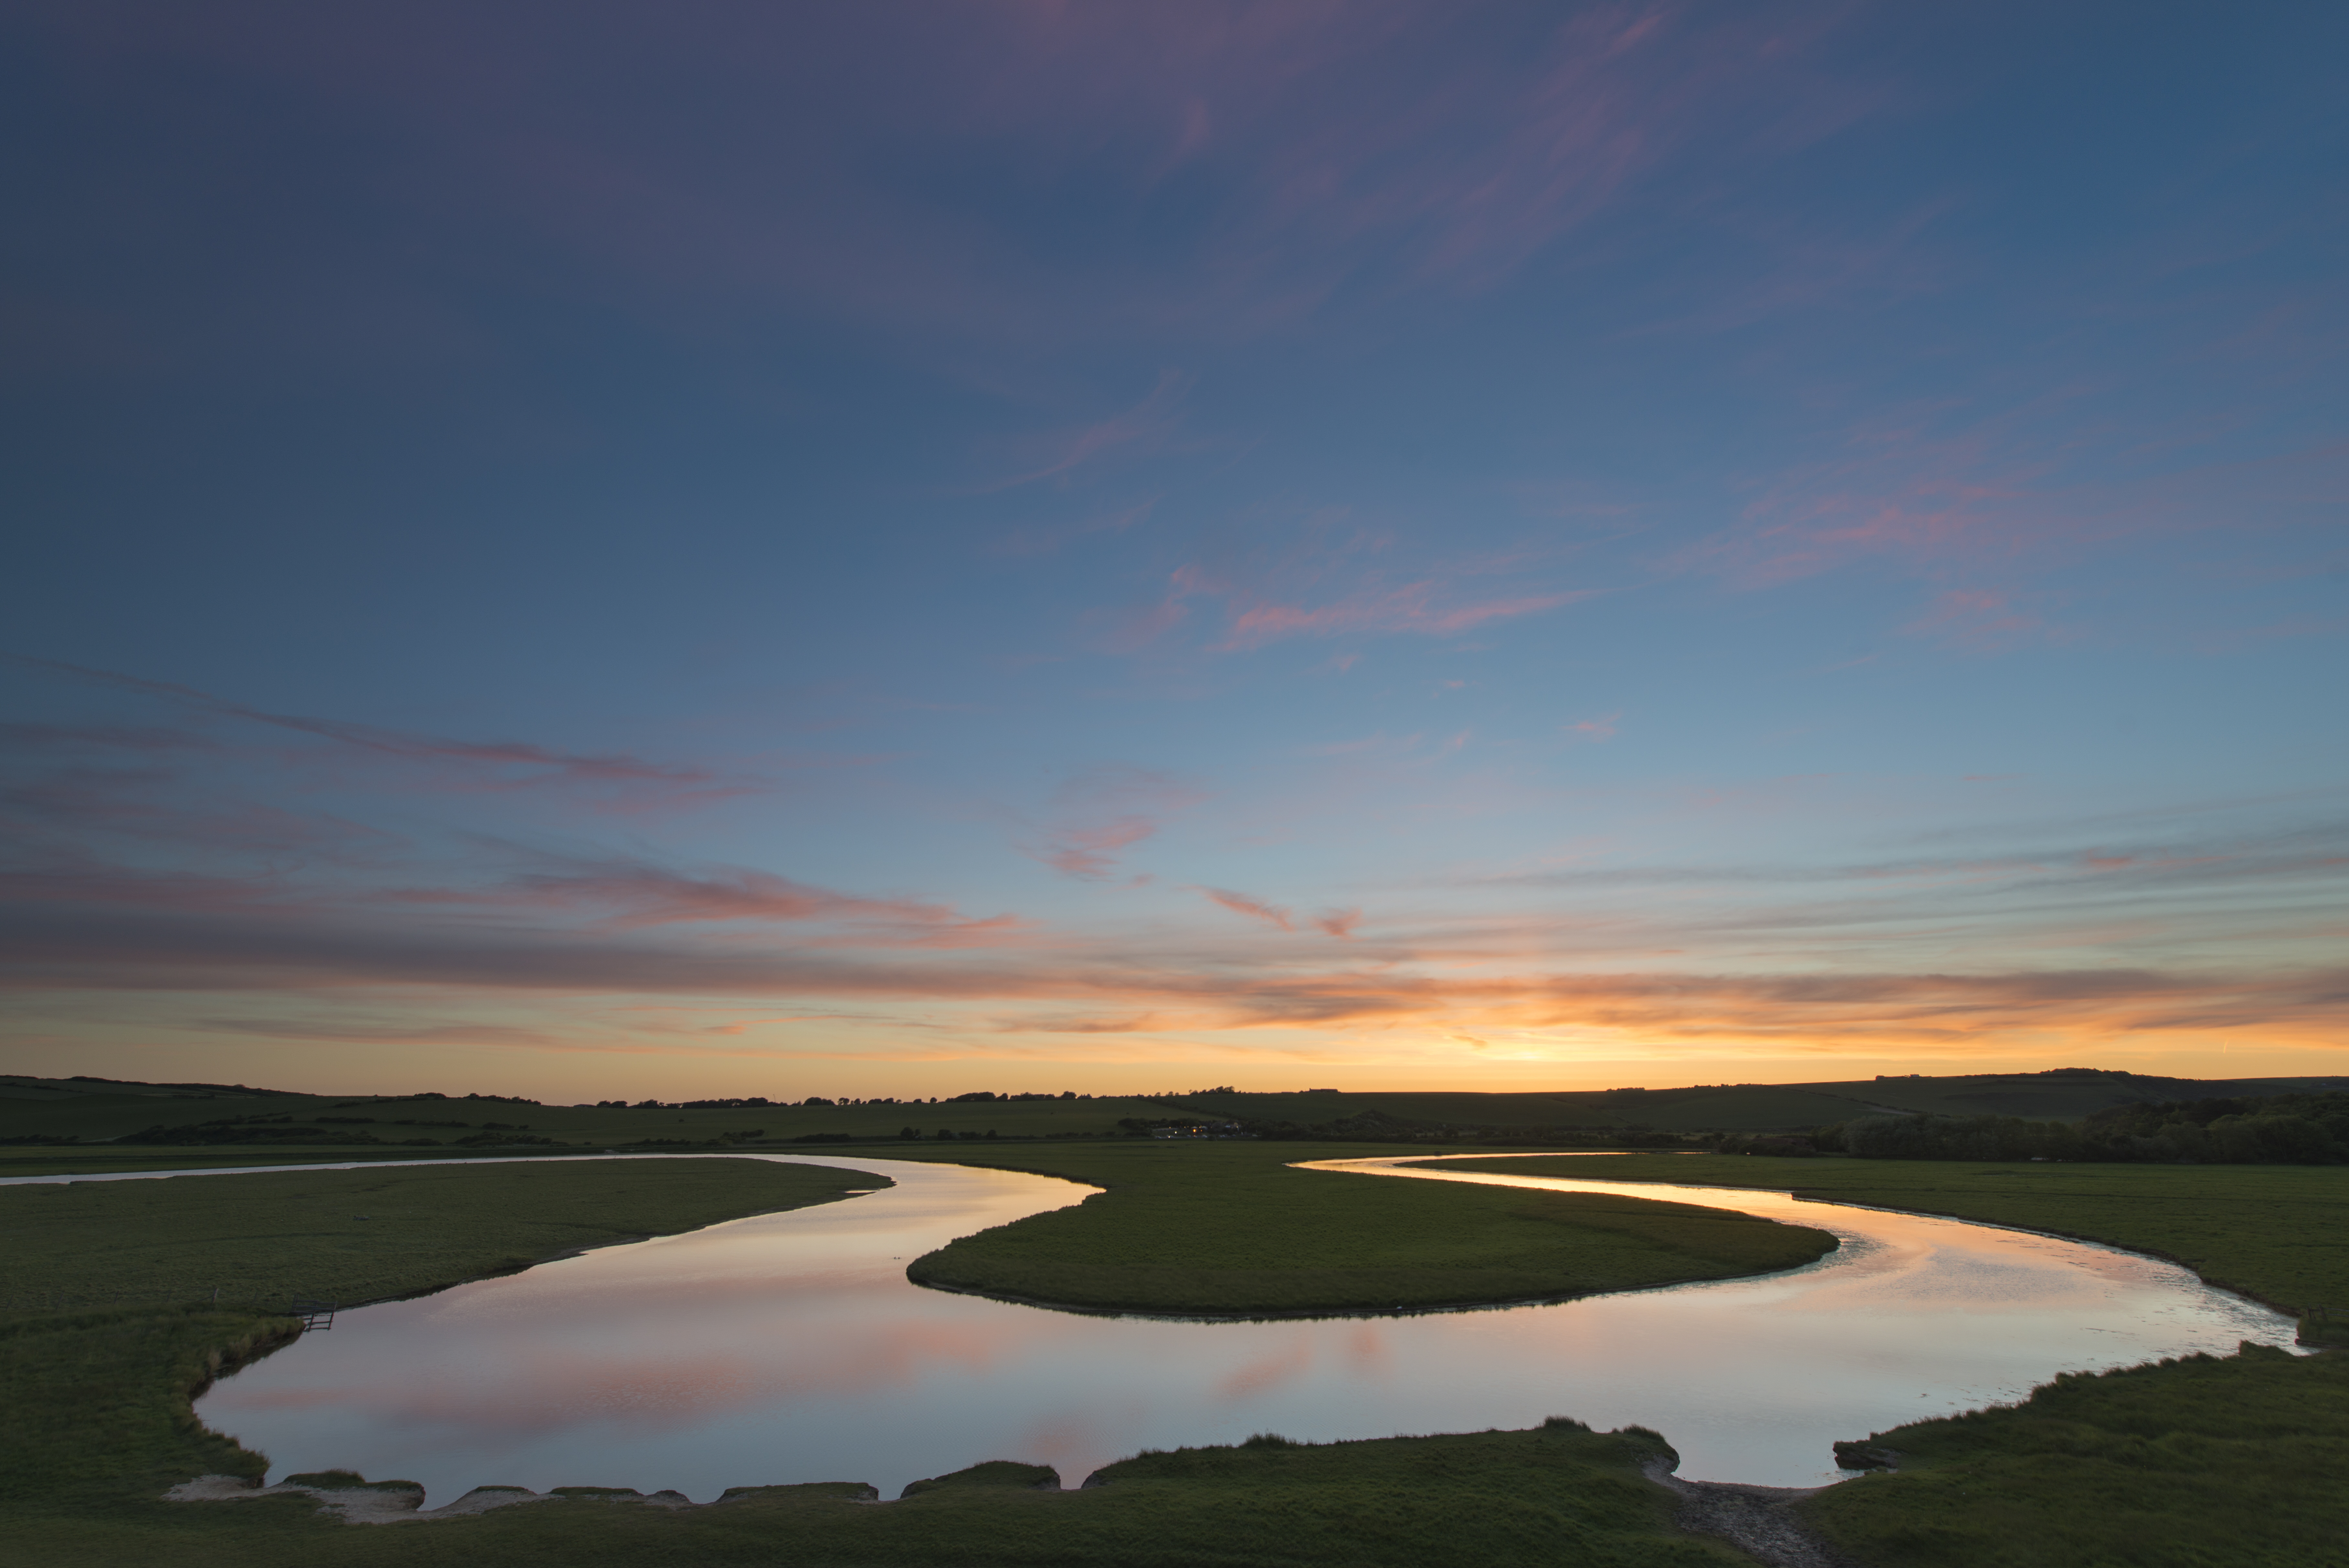 Sunset reflected in the meanders of the Cuckmere River, Cuckmere Valley, East Sussex.